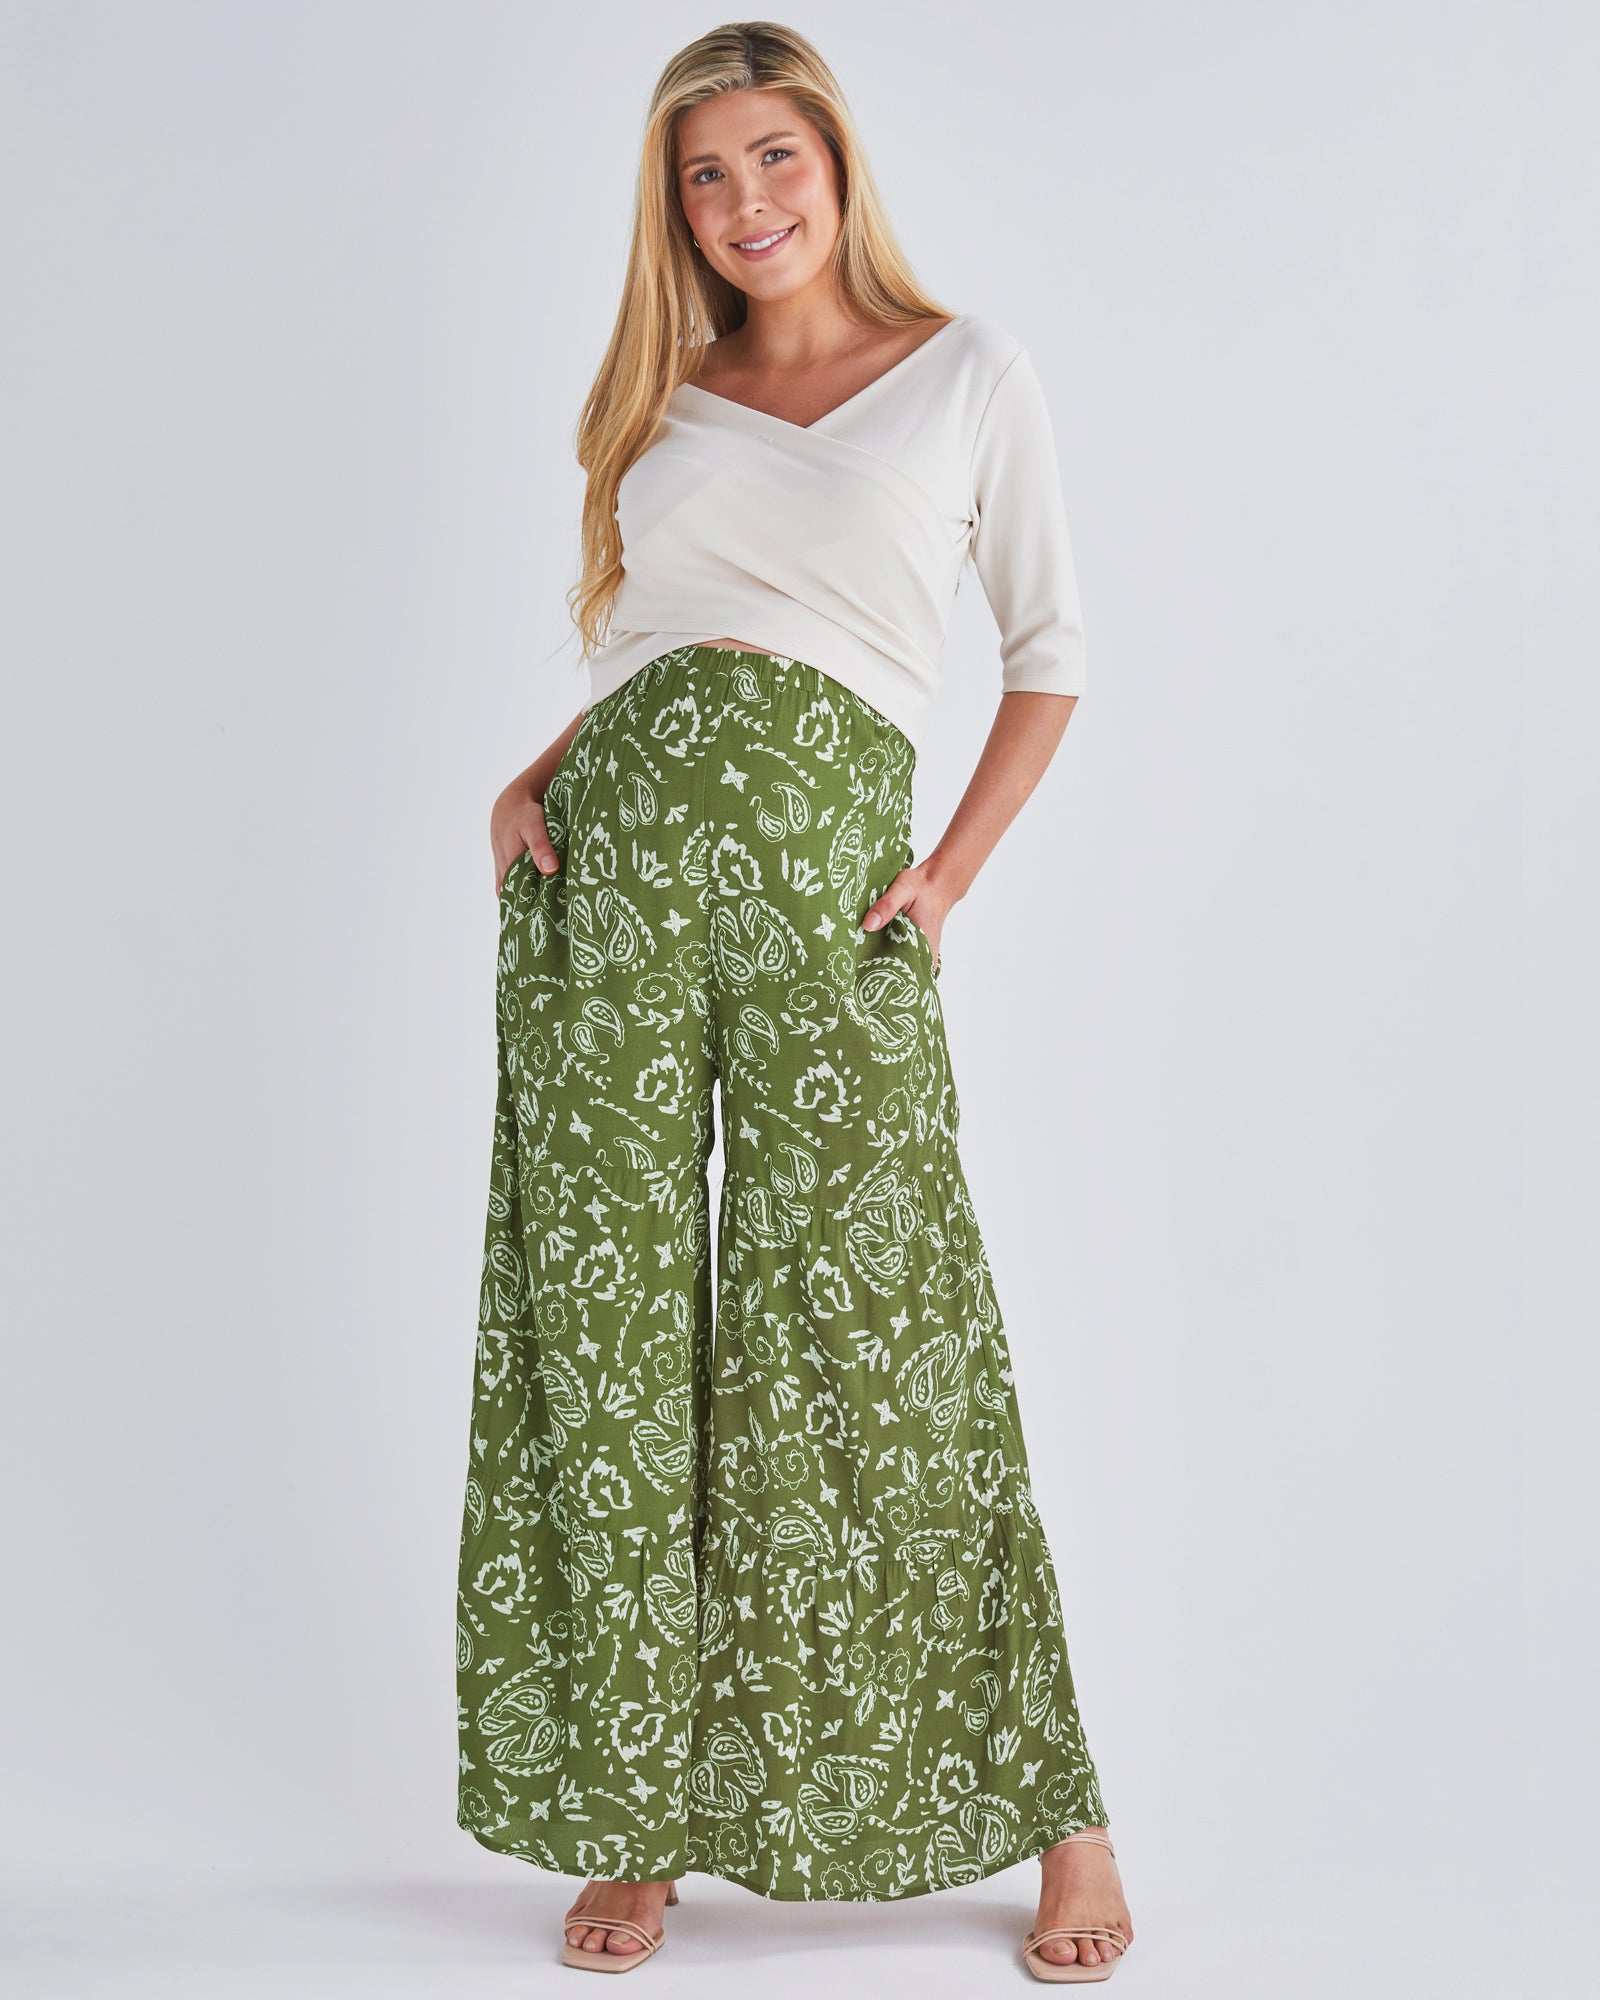 A pregnant Woman Wearing Stacie Wide Leg Green Maternity Pants in Paisley Print from Angel Maternity